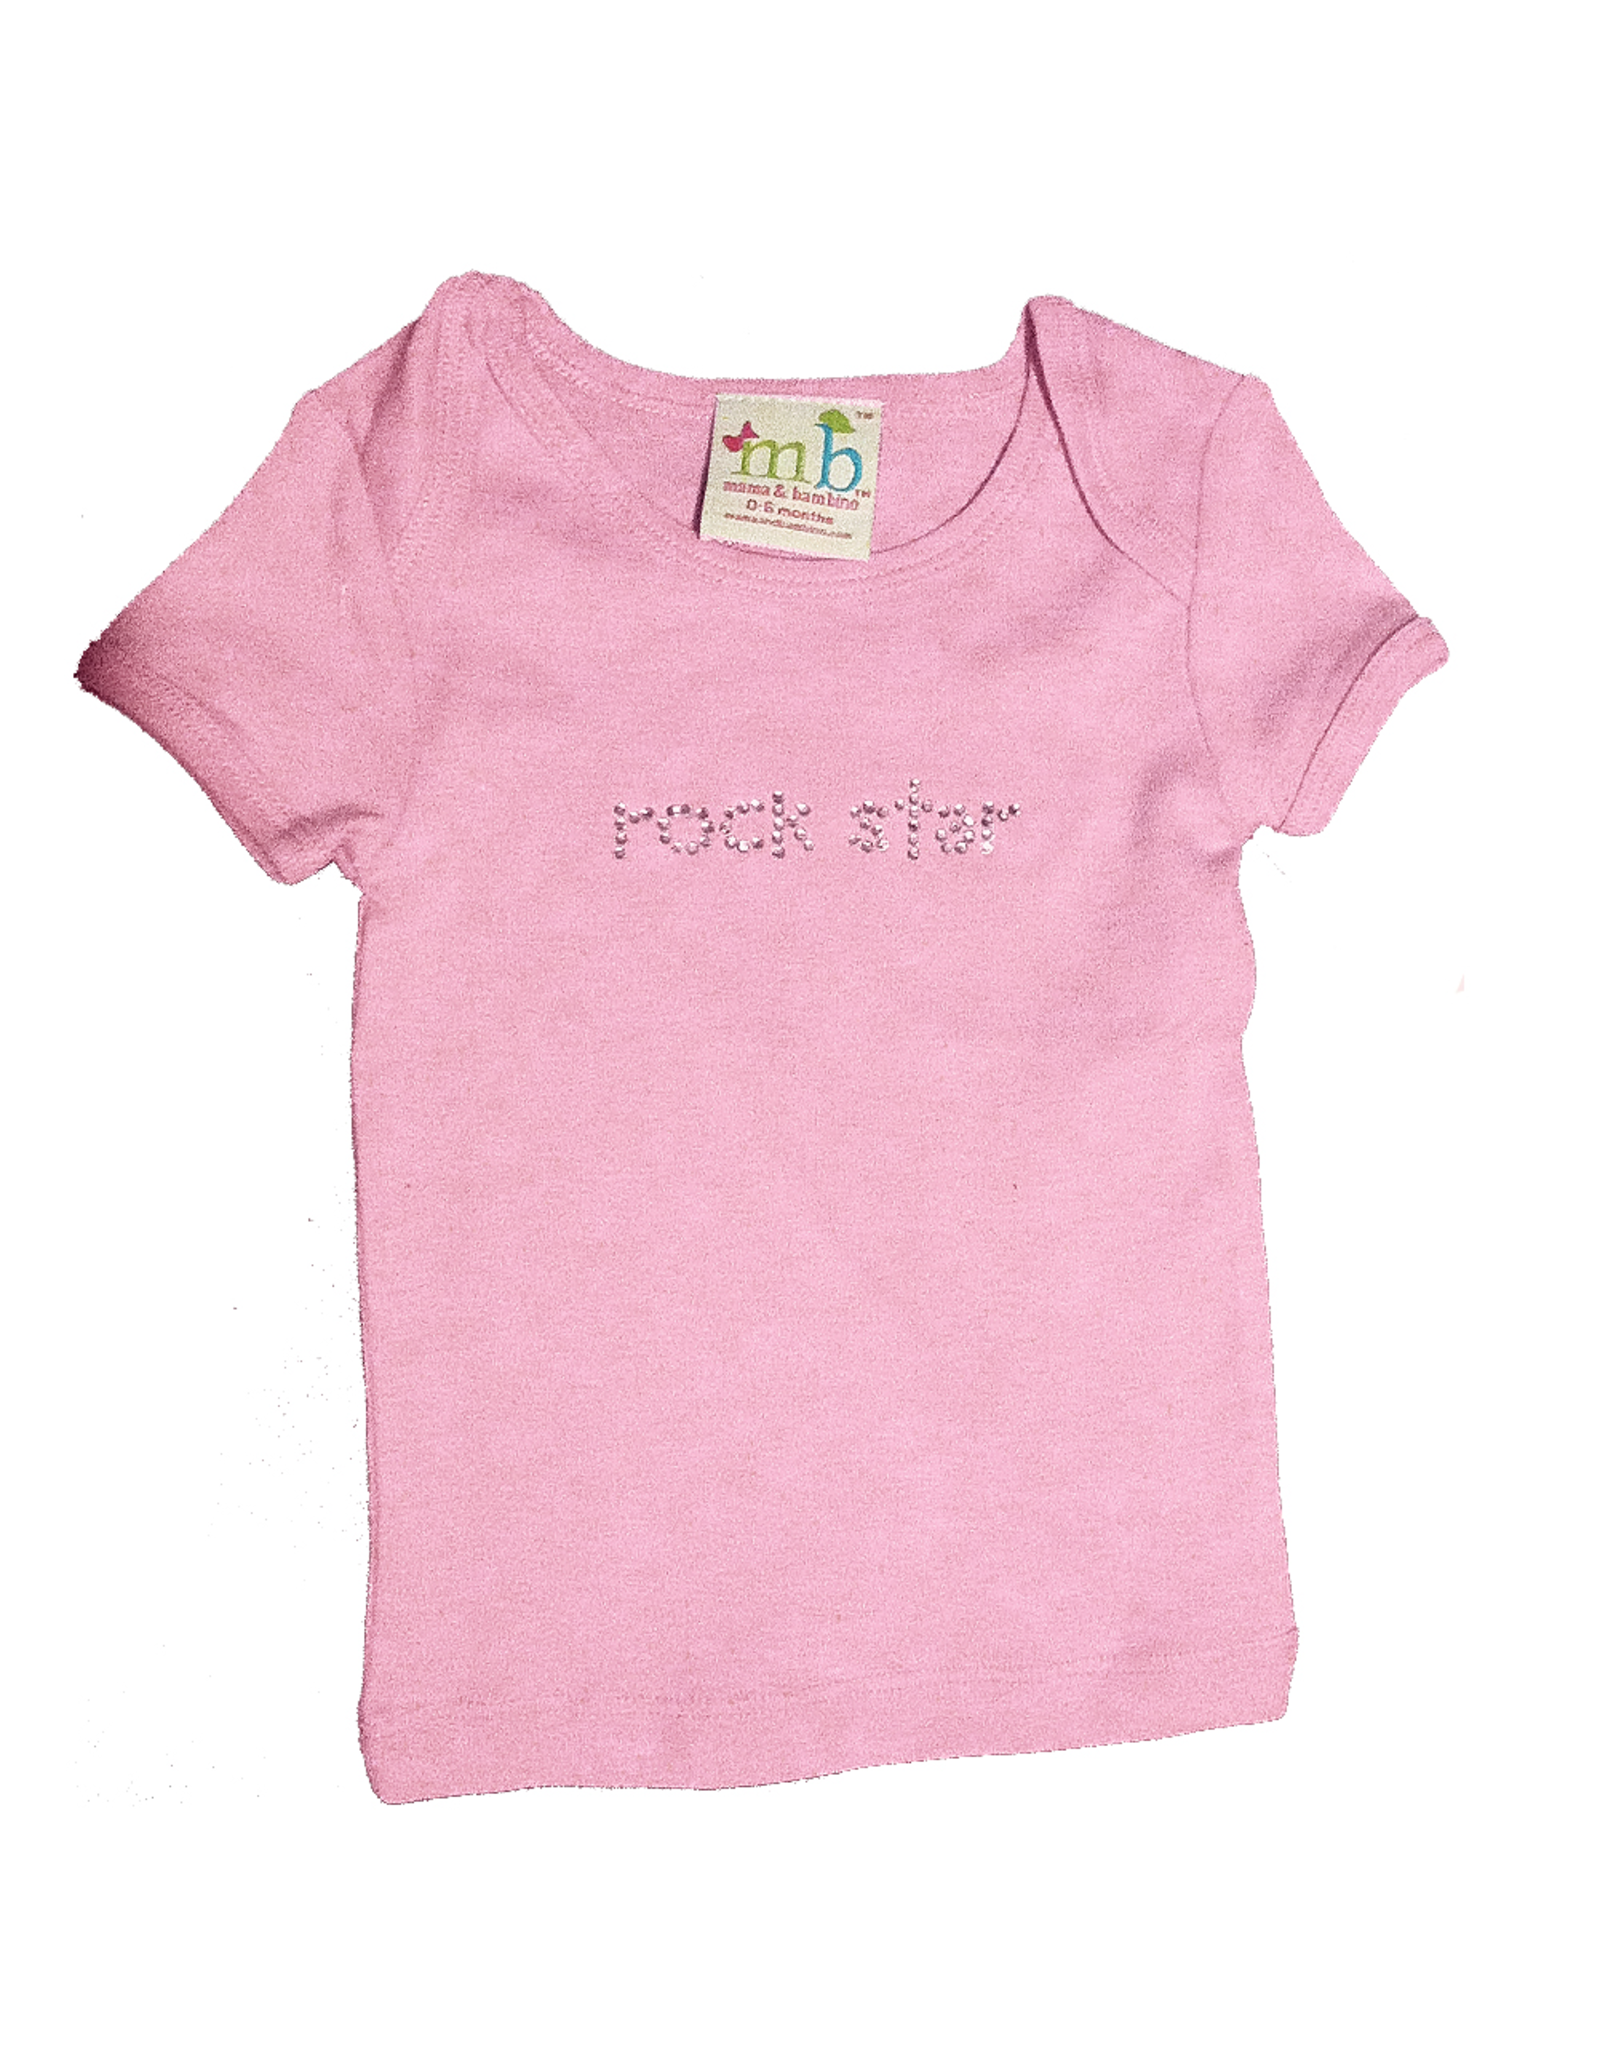 Rock Baby Clothes Baby Rock T-Shirts Tees - Kiditude Janes Addiction